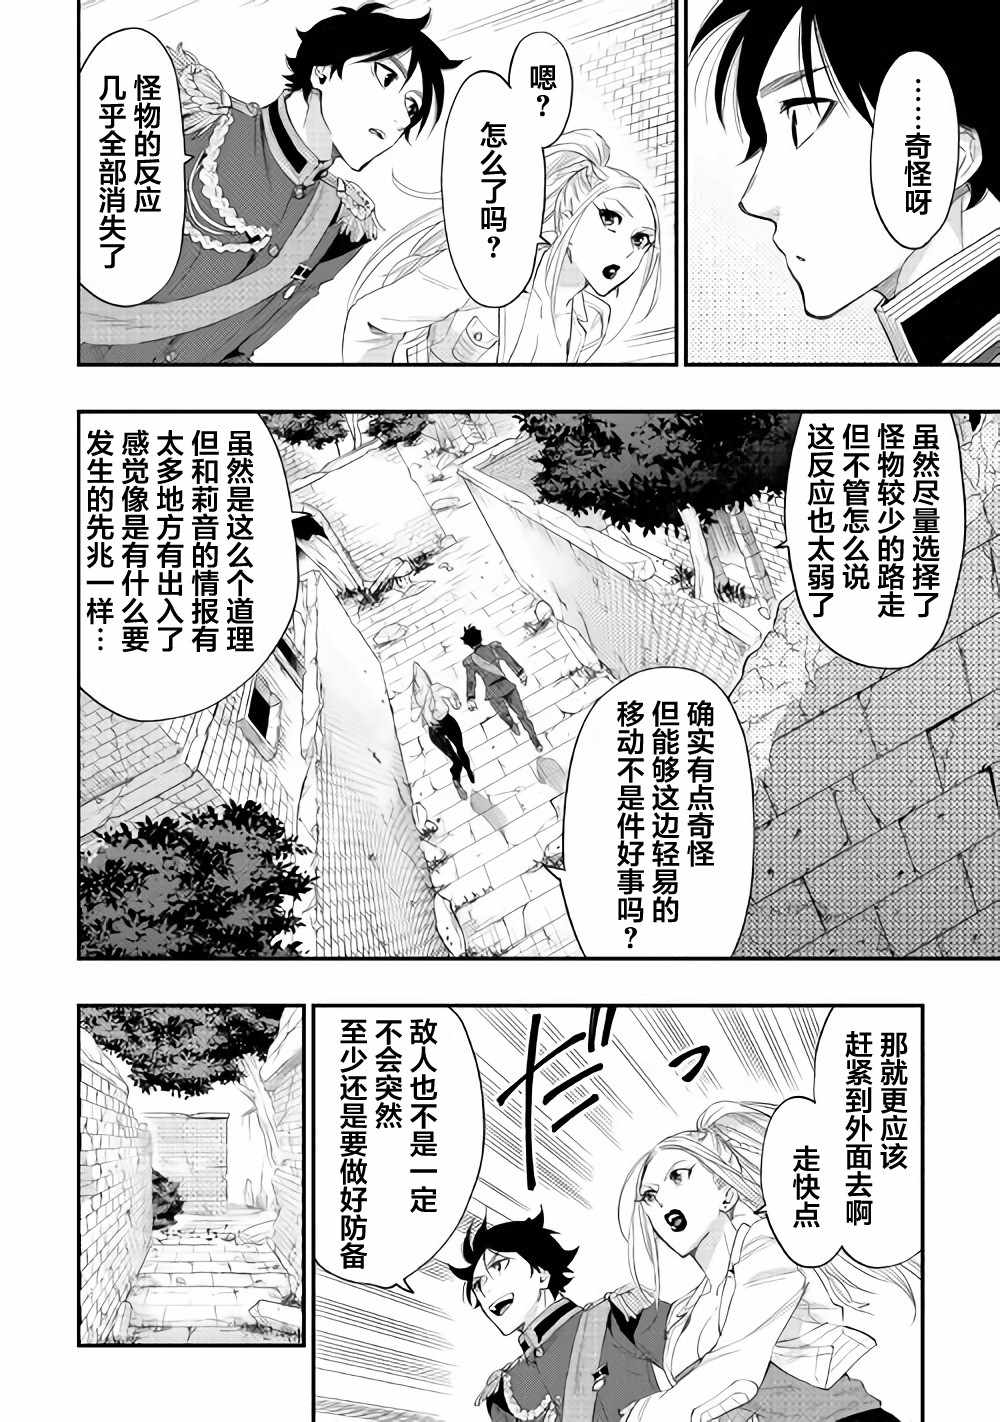 The New Gate - 第43話 - 6